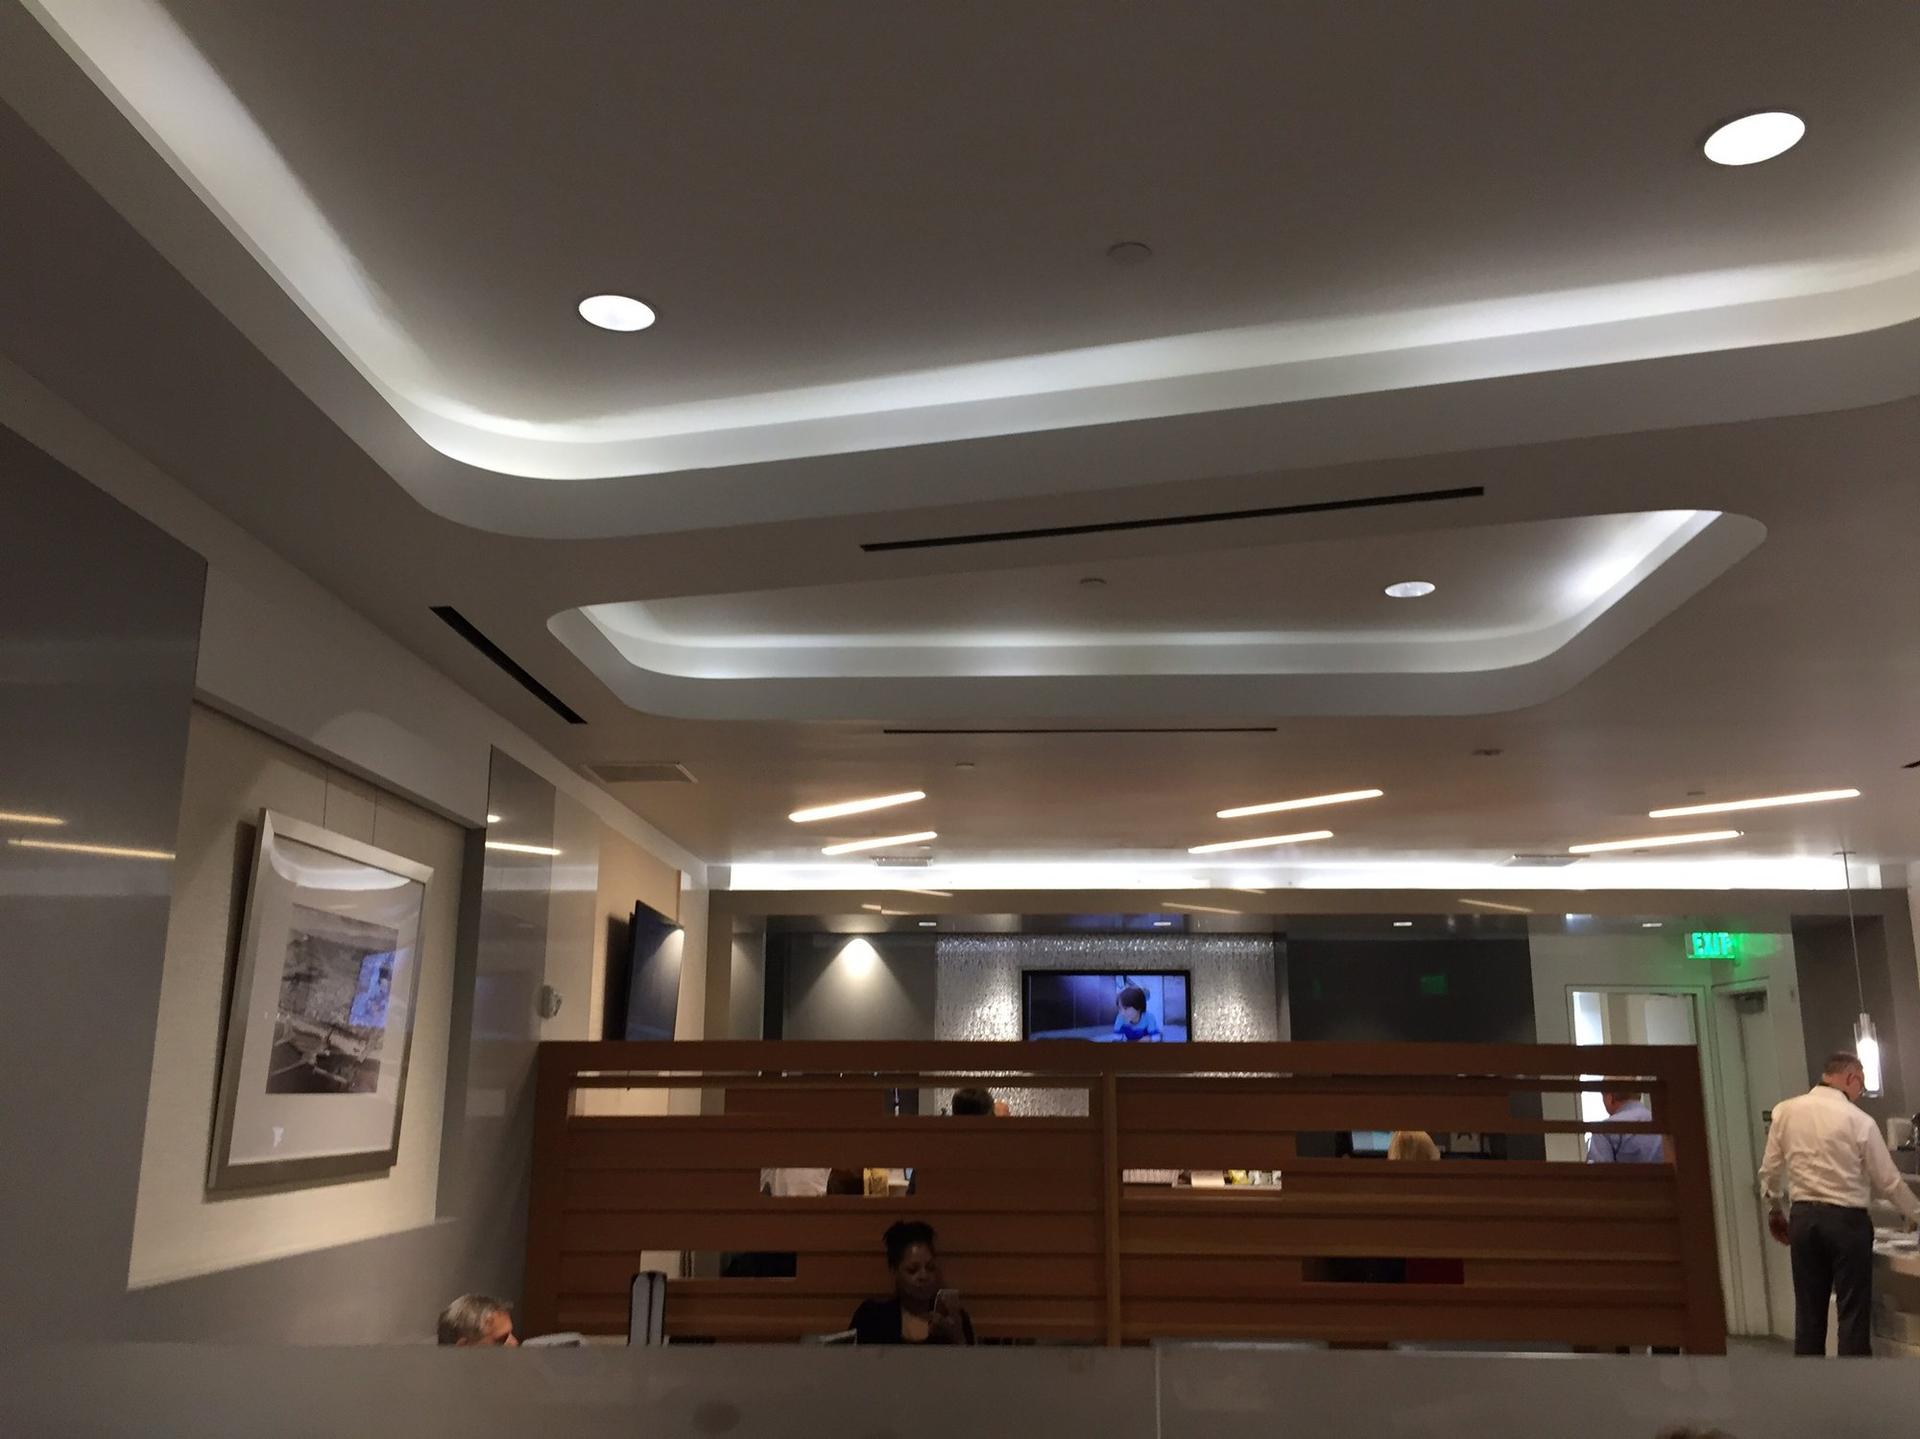 American Airlines Admirals Club image 37 of 43